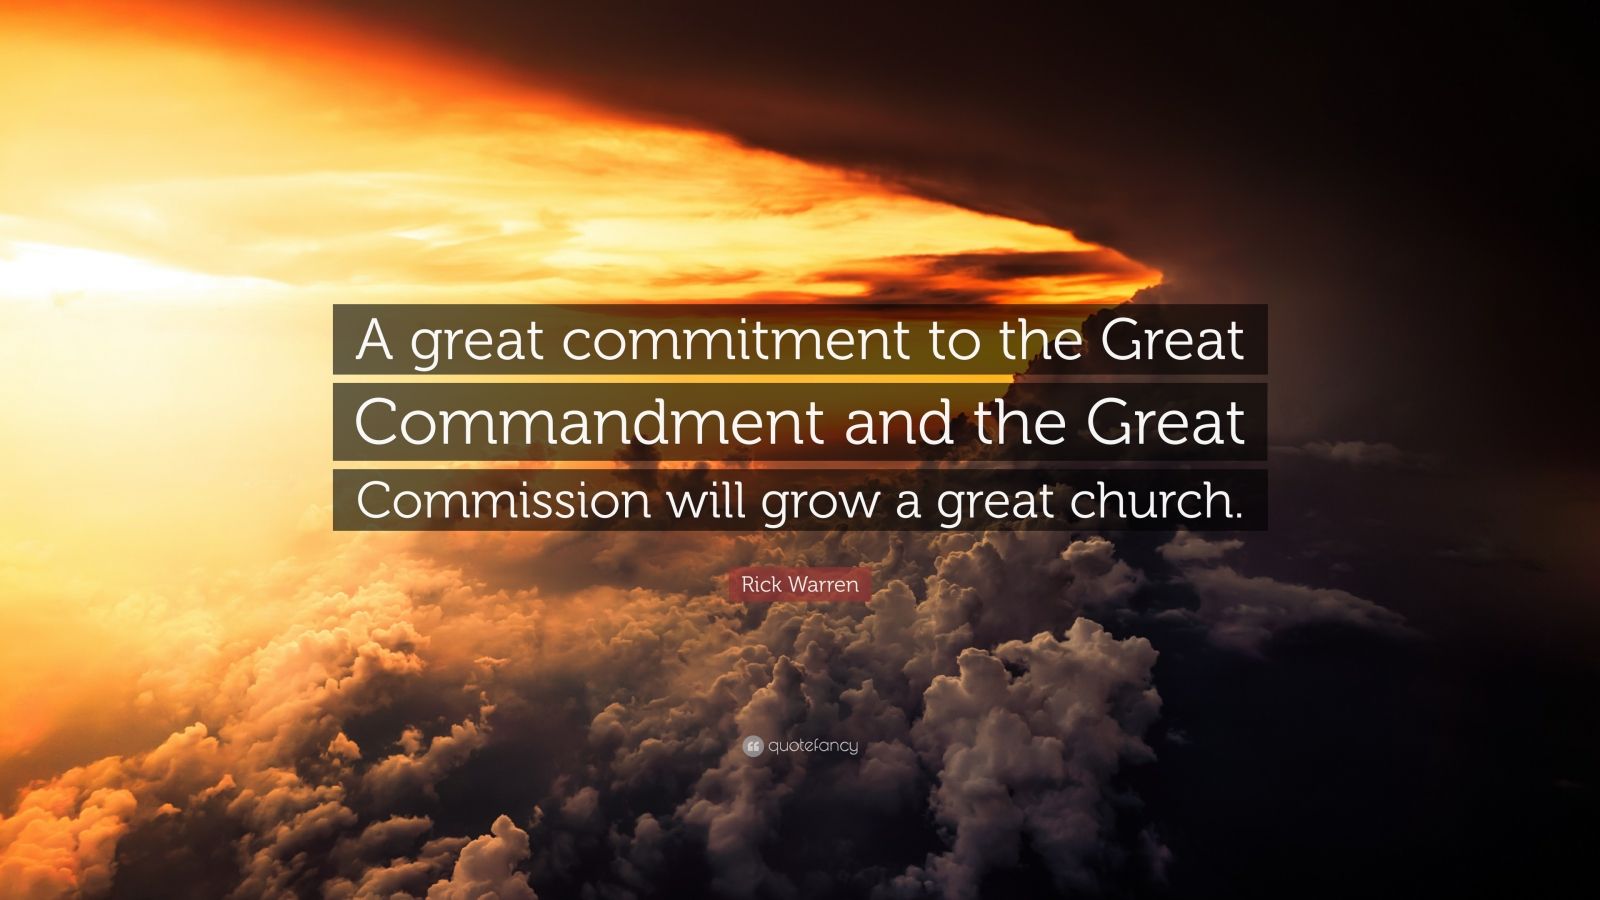 Rick Warren Quote: “A great commitment to the Great Commandment and the